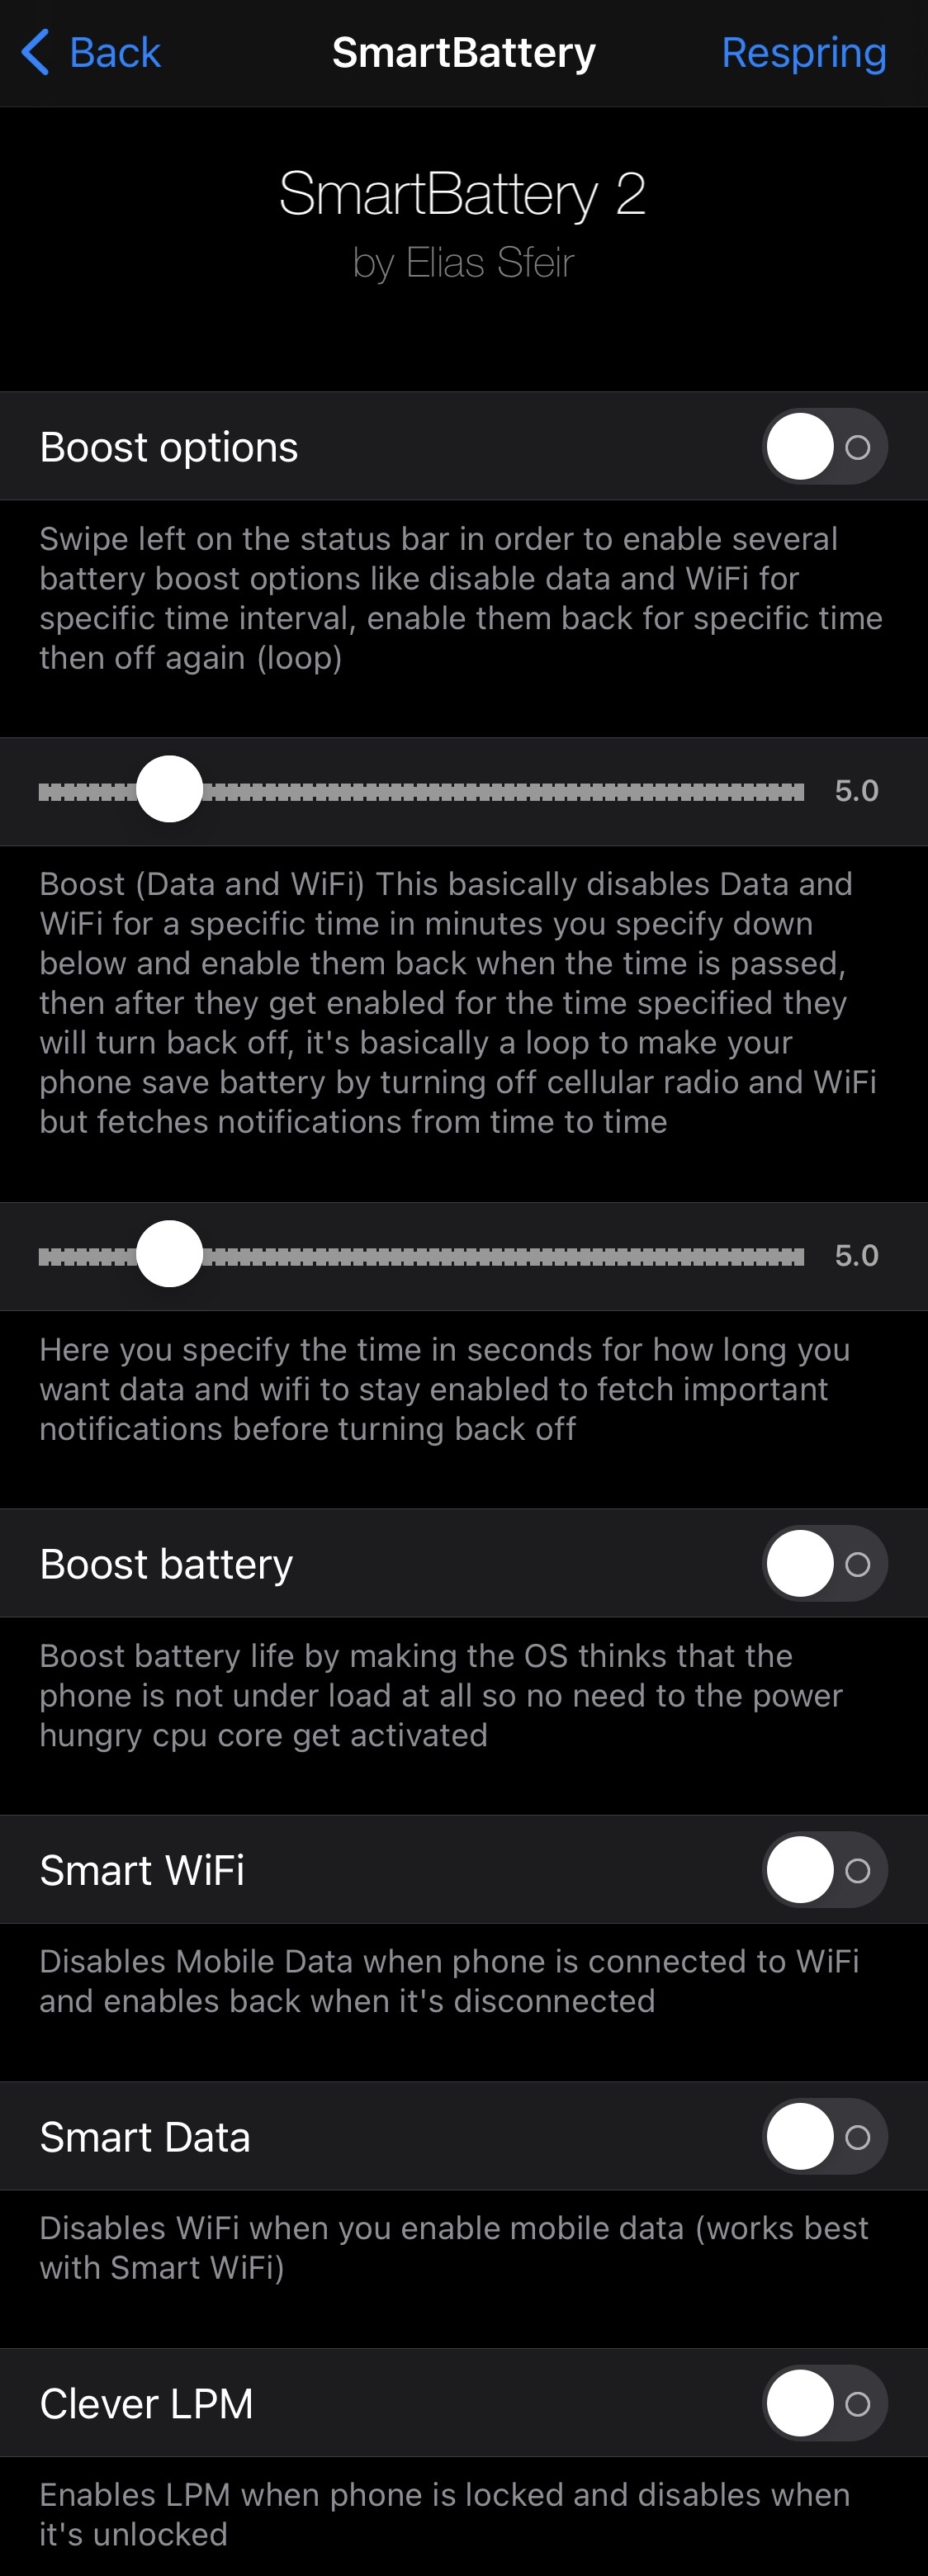 SmartBattery iOS 15 Boost Battery preference pane.